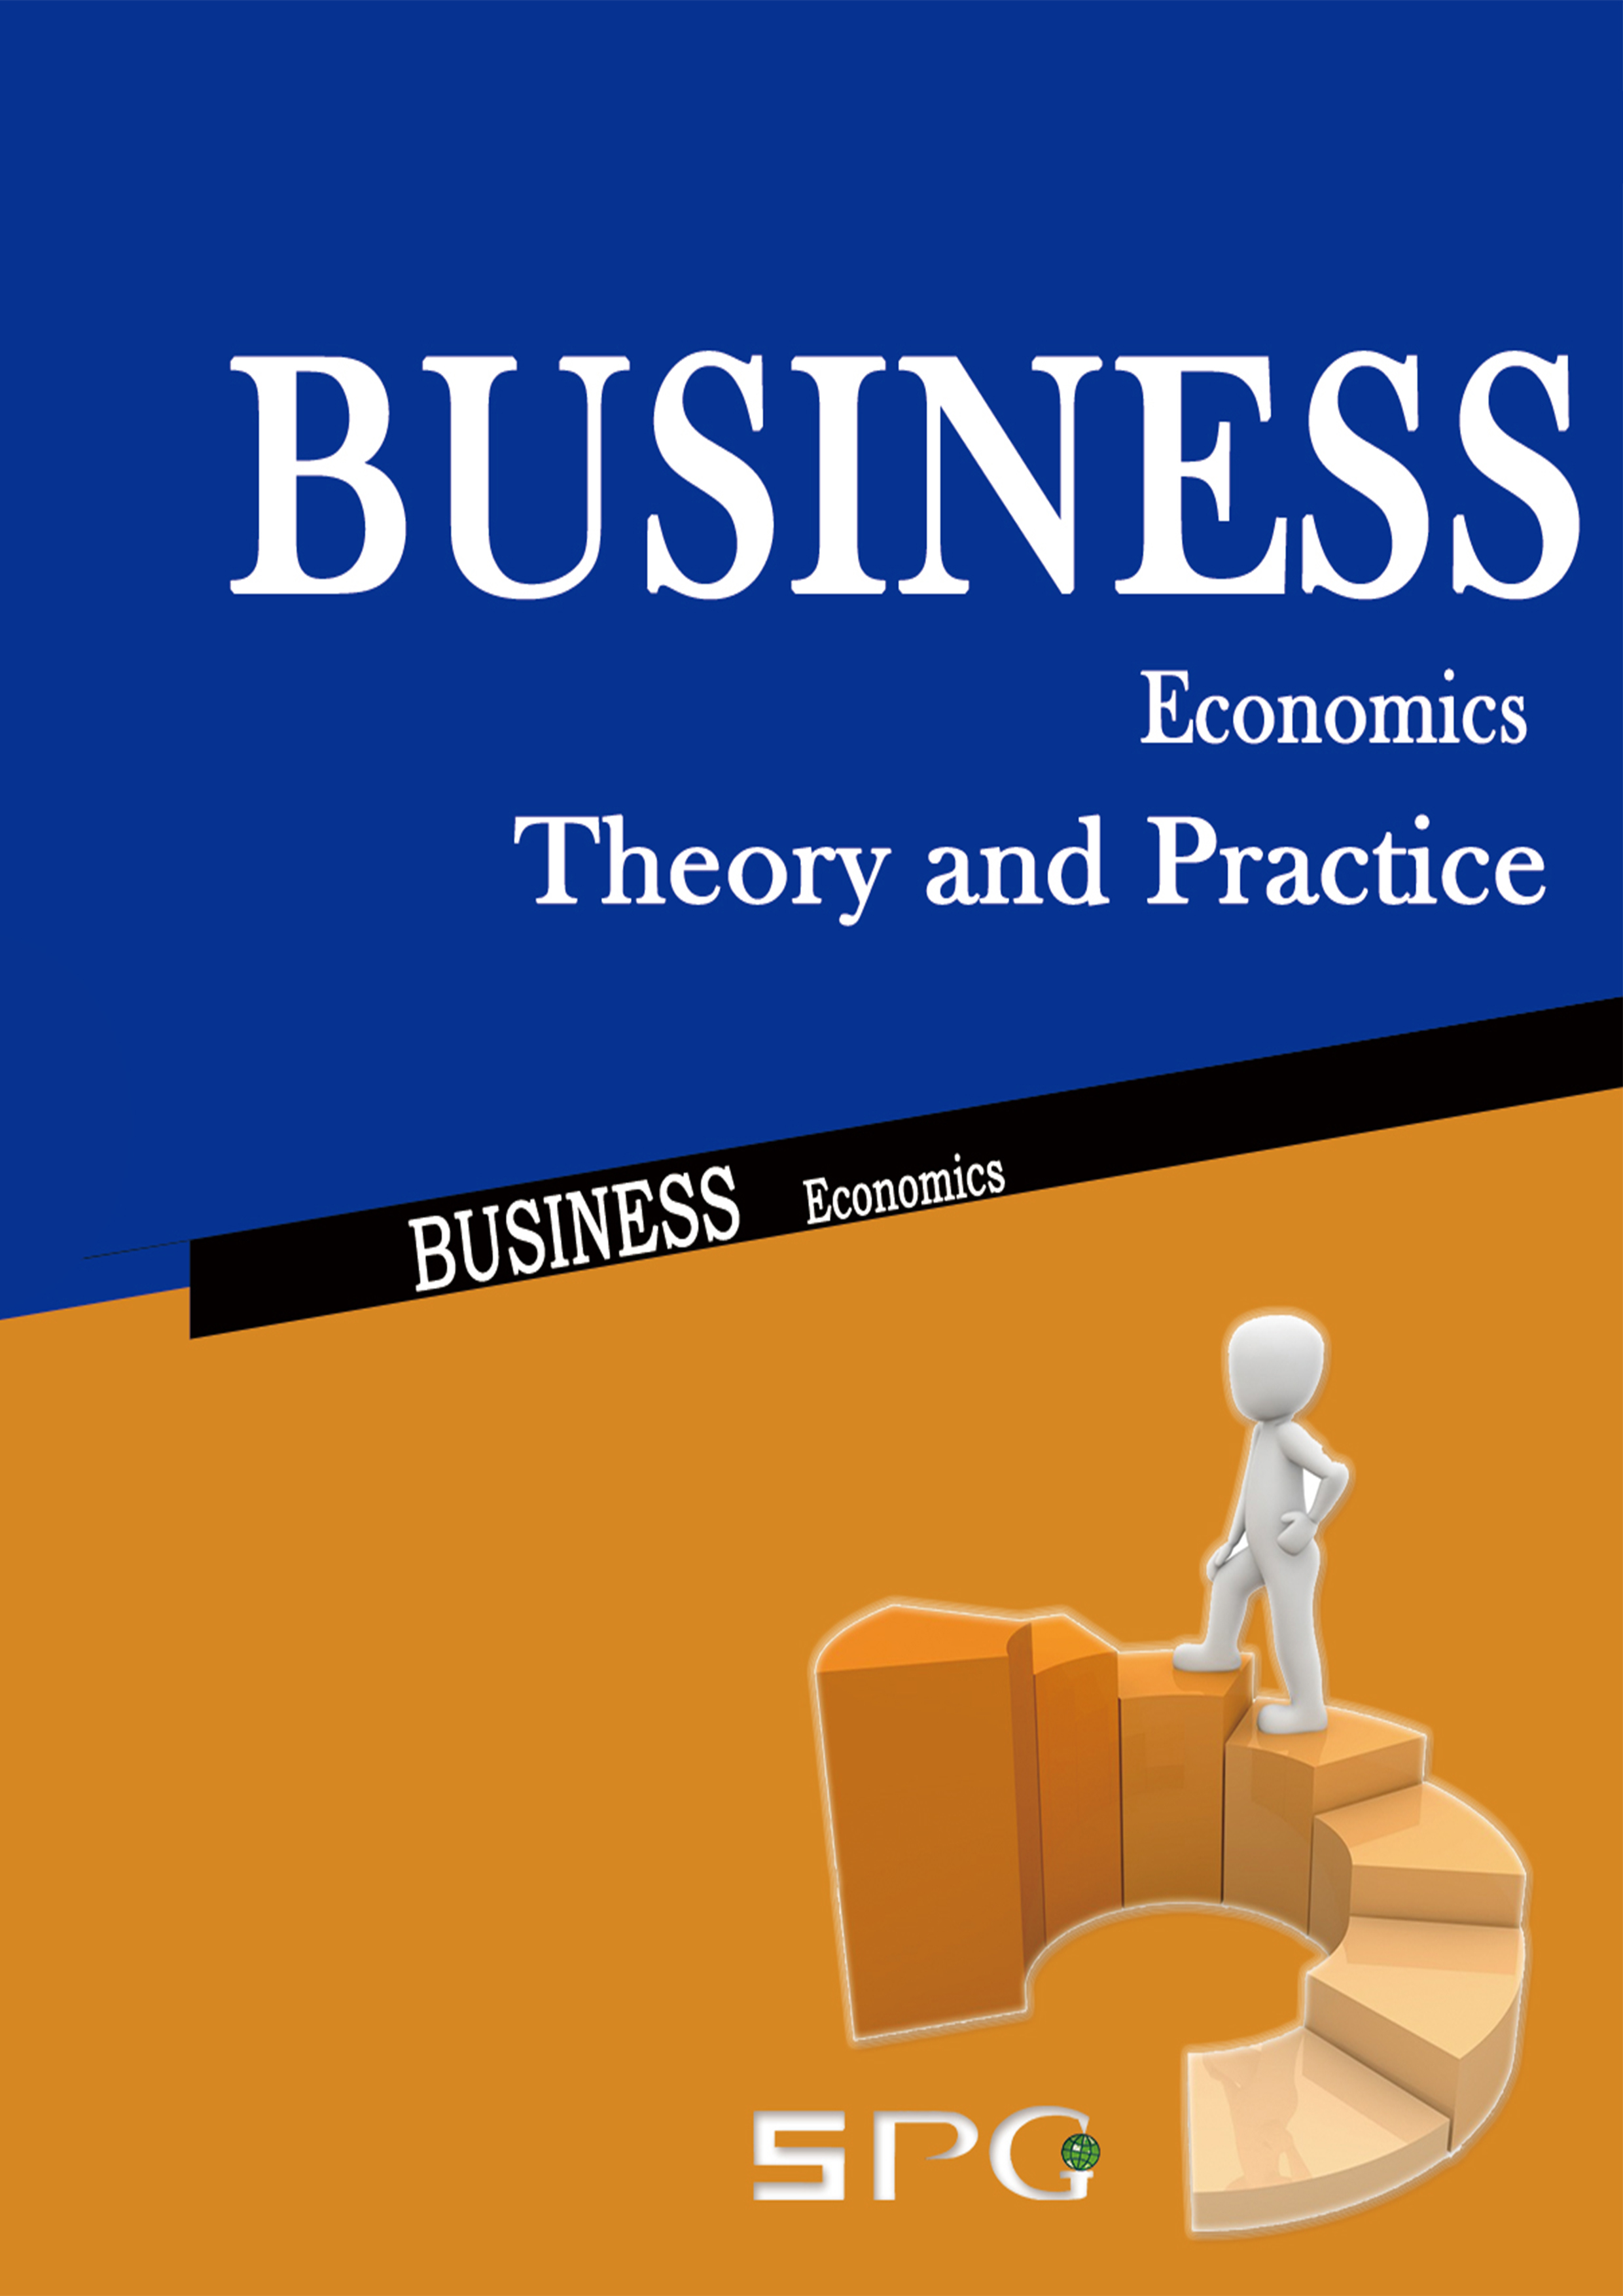 Business Economics Theory and Practice | Scholar Publishing Group